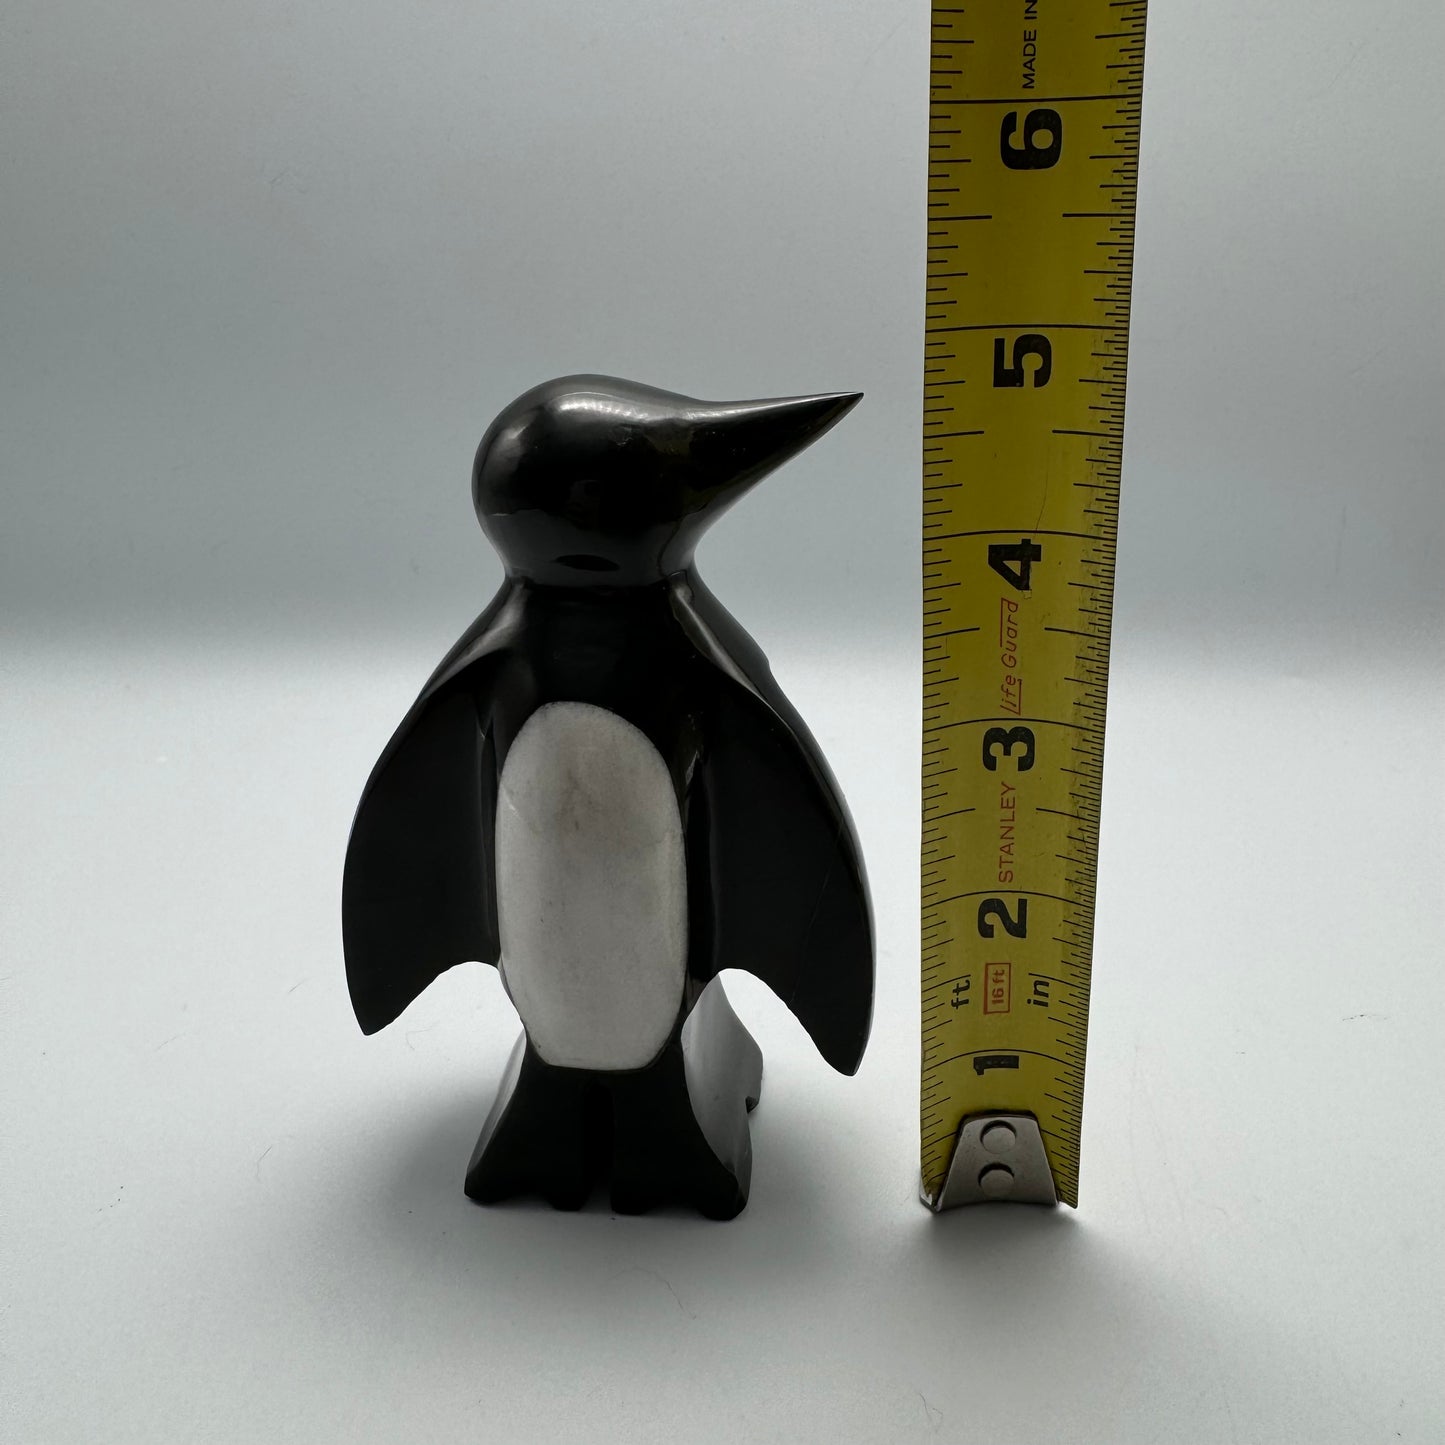 Black and White Carved Stone Penguin (Cracked Wing as Disclosed)